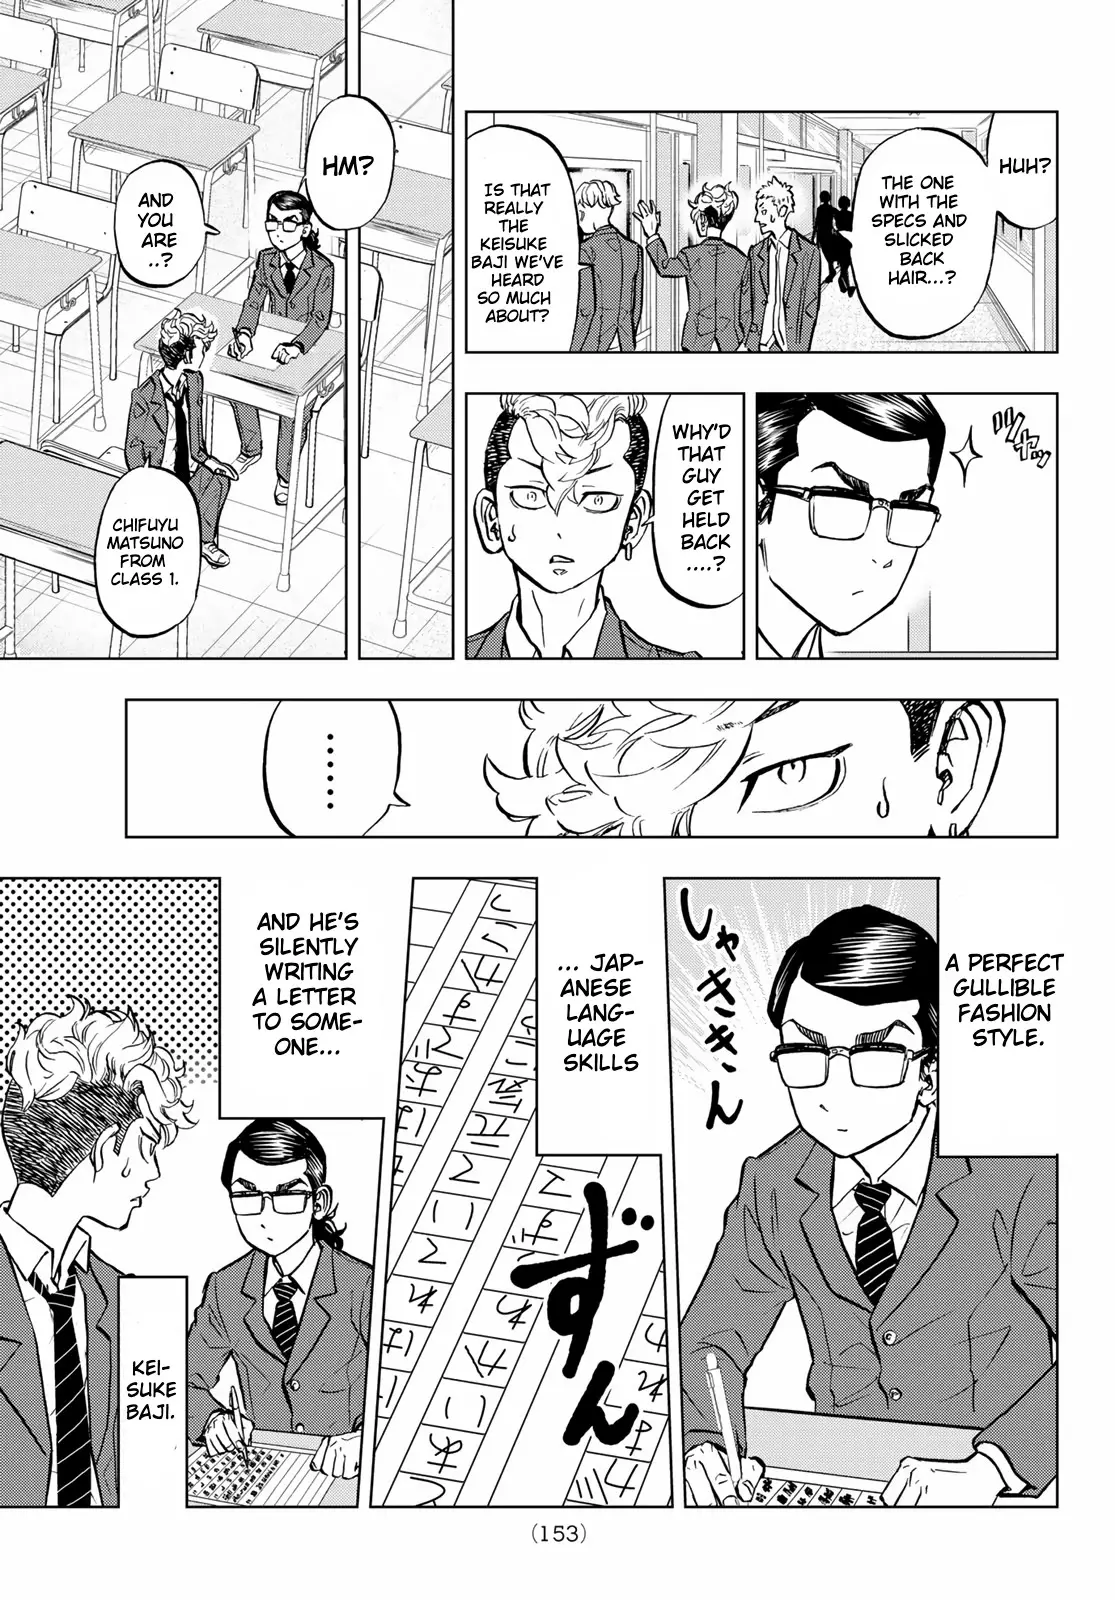 Tokyo Revengers: Letter From Keisuke Baji - 1 page 21-e3bbd7a2